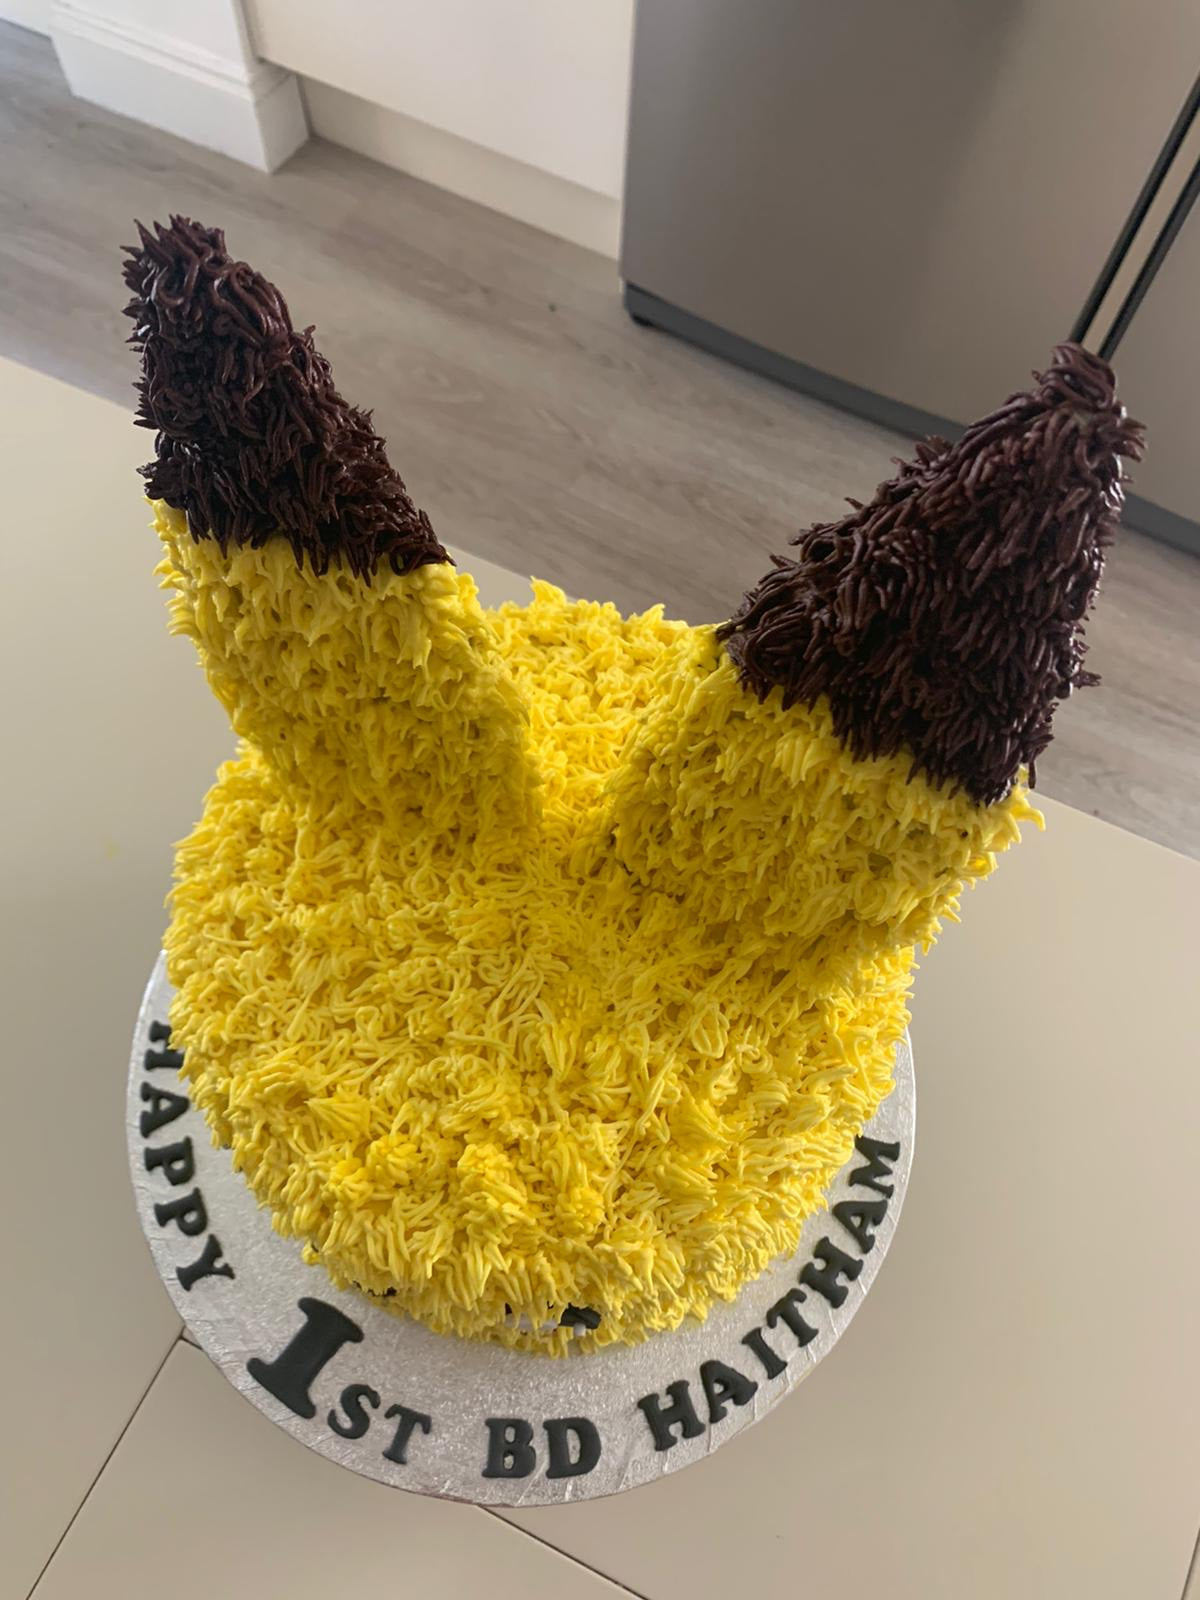 YELLOW MOUSE CAKE